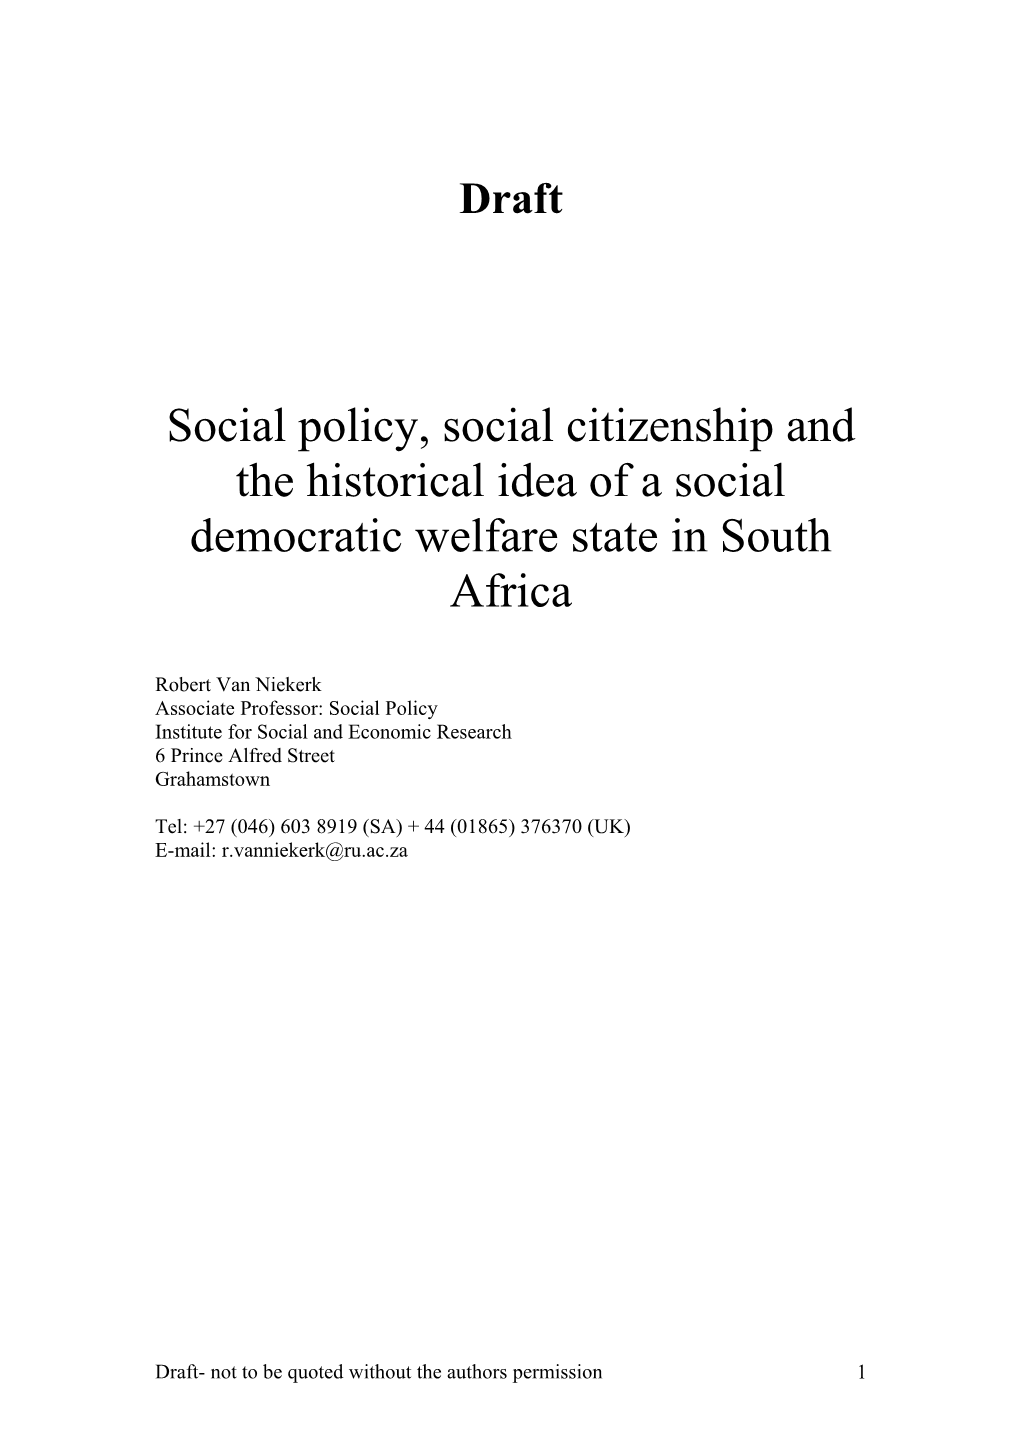 Paper for Conference on the Potentials for and Challenges of Creating a Developmental State